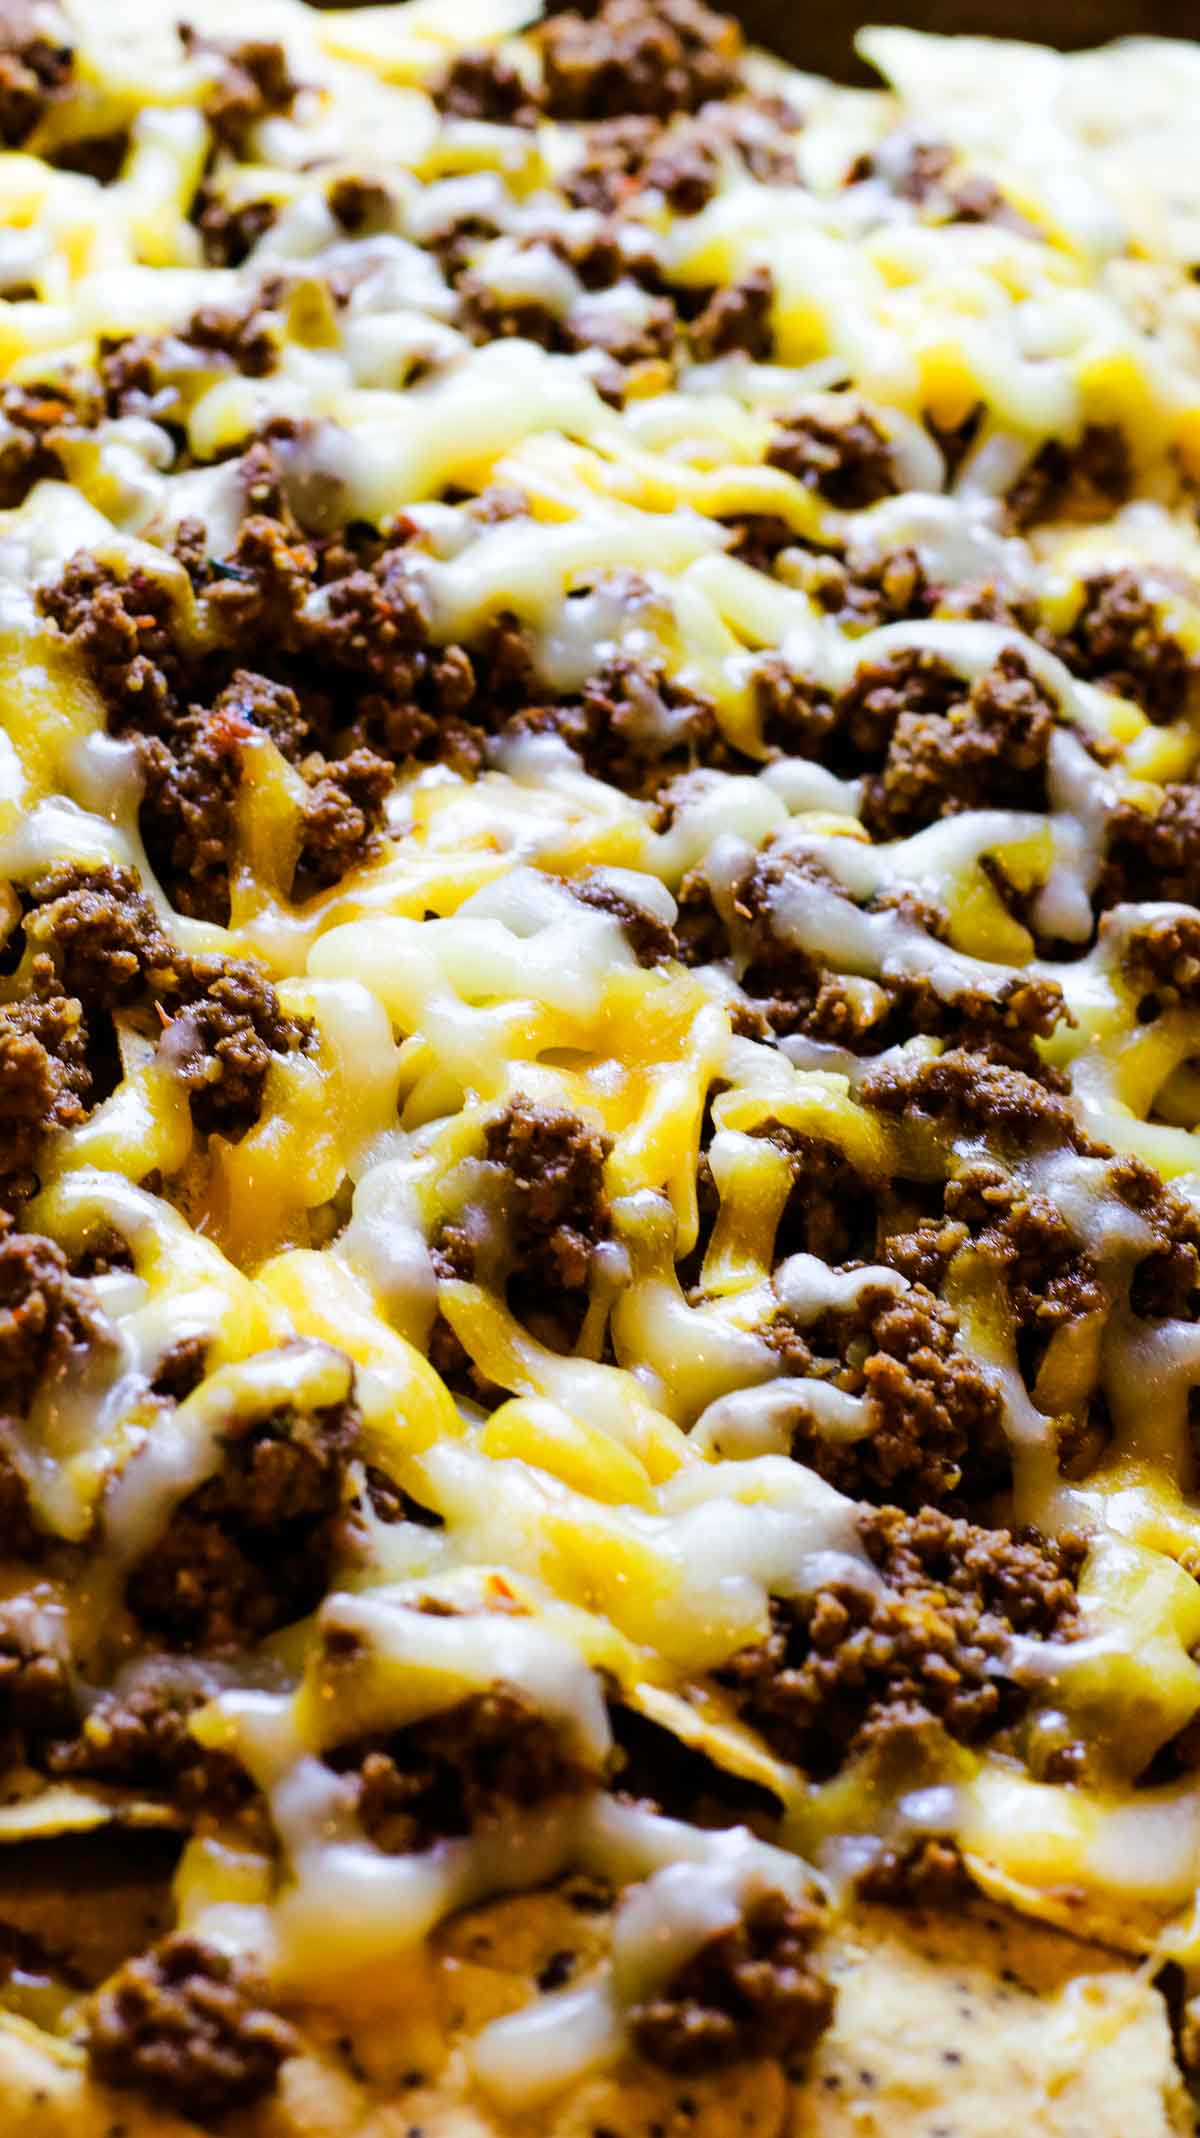 image of taco meat and melted cheese on top of tortilla chips